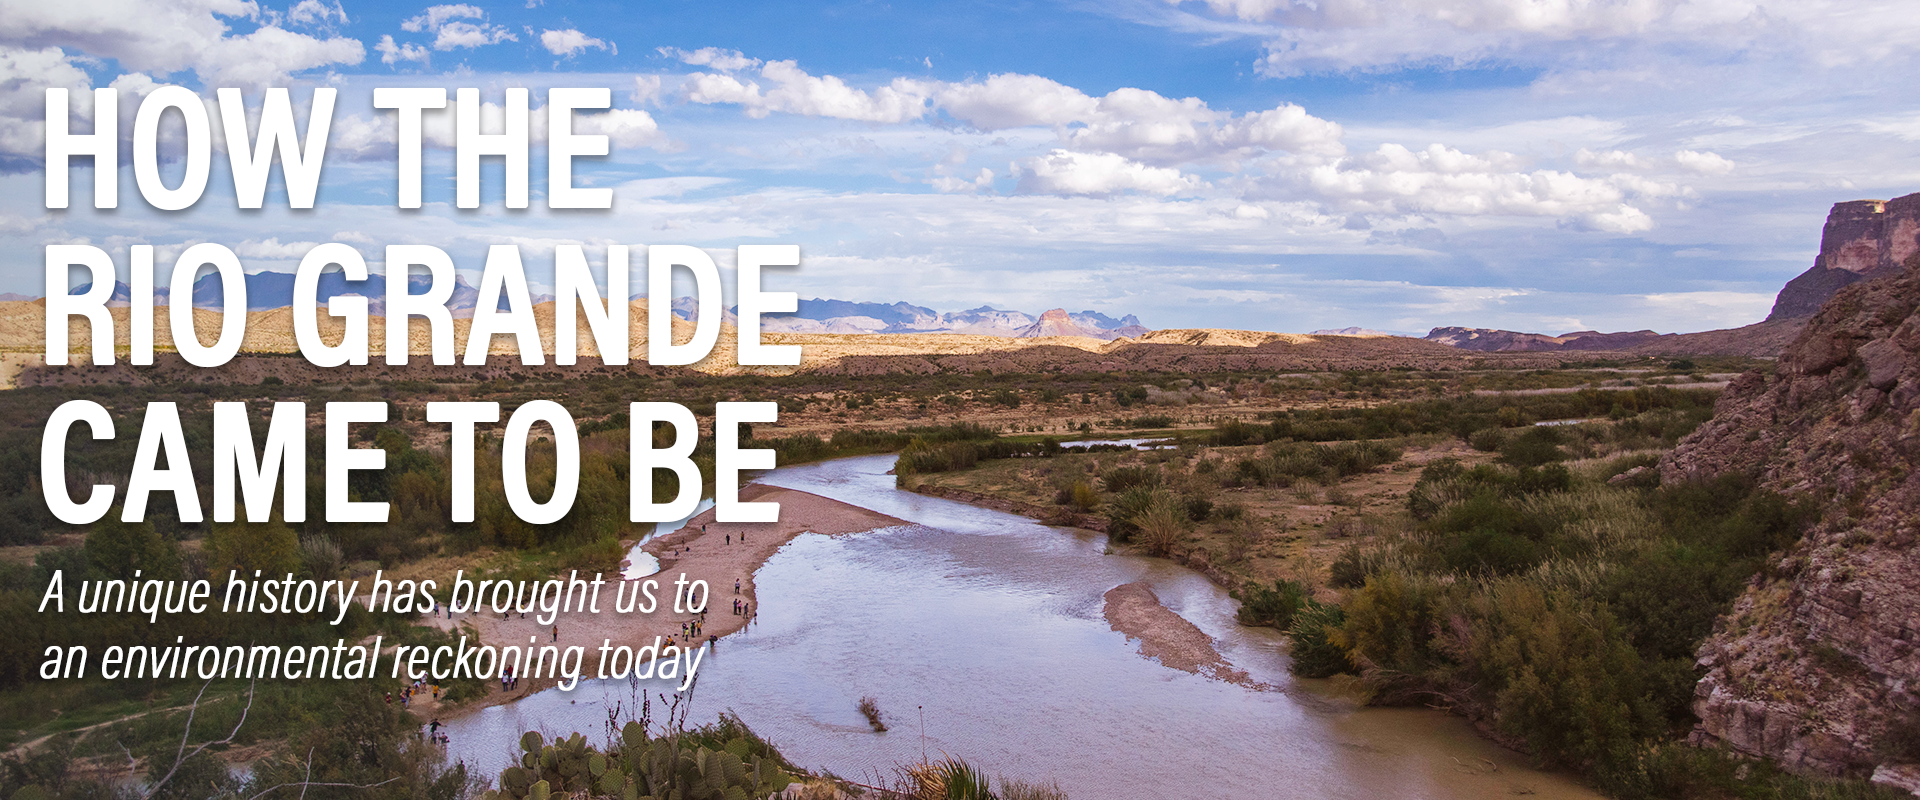 How the Rio Grande Came to Be